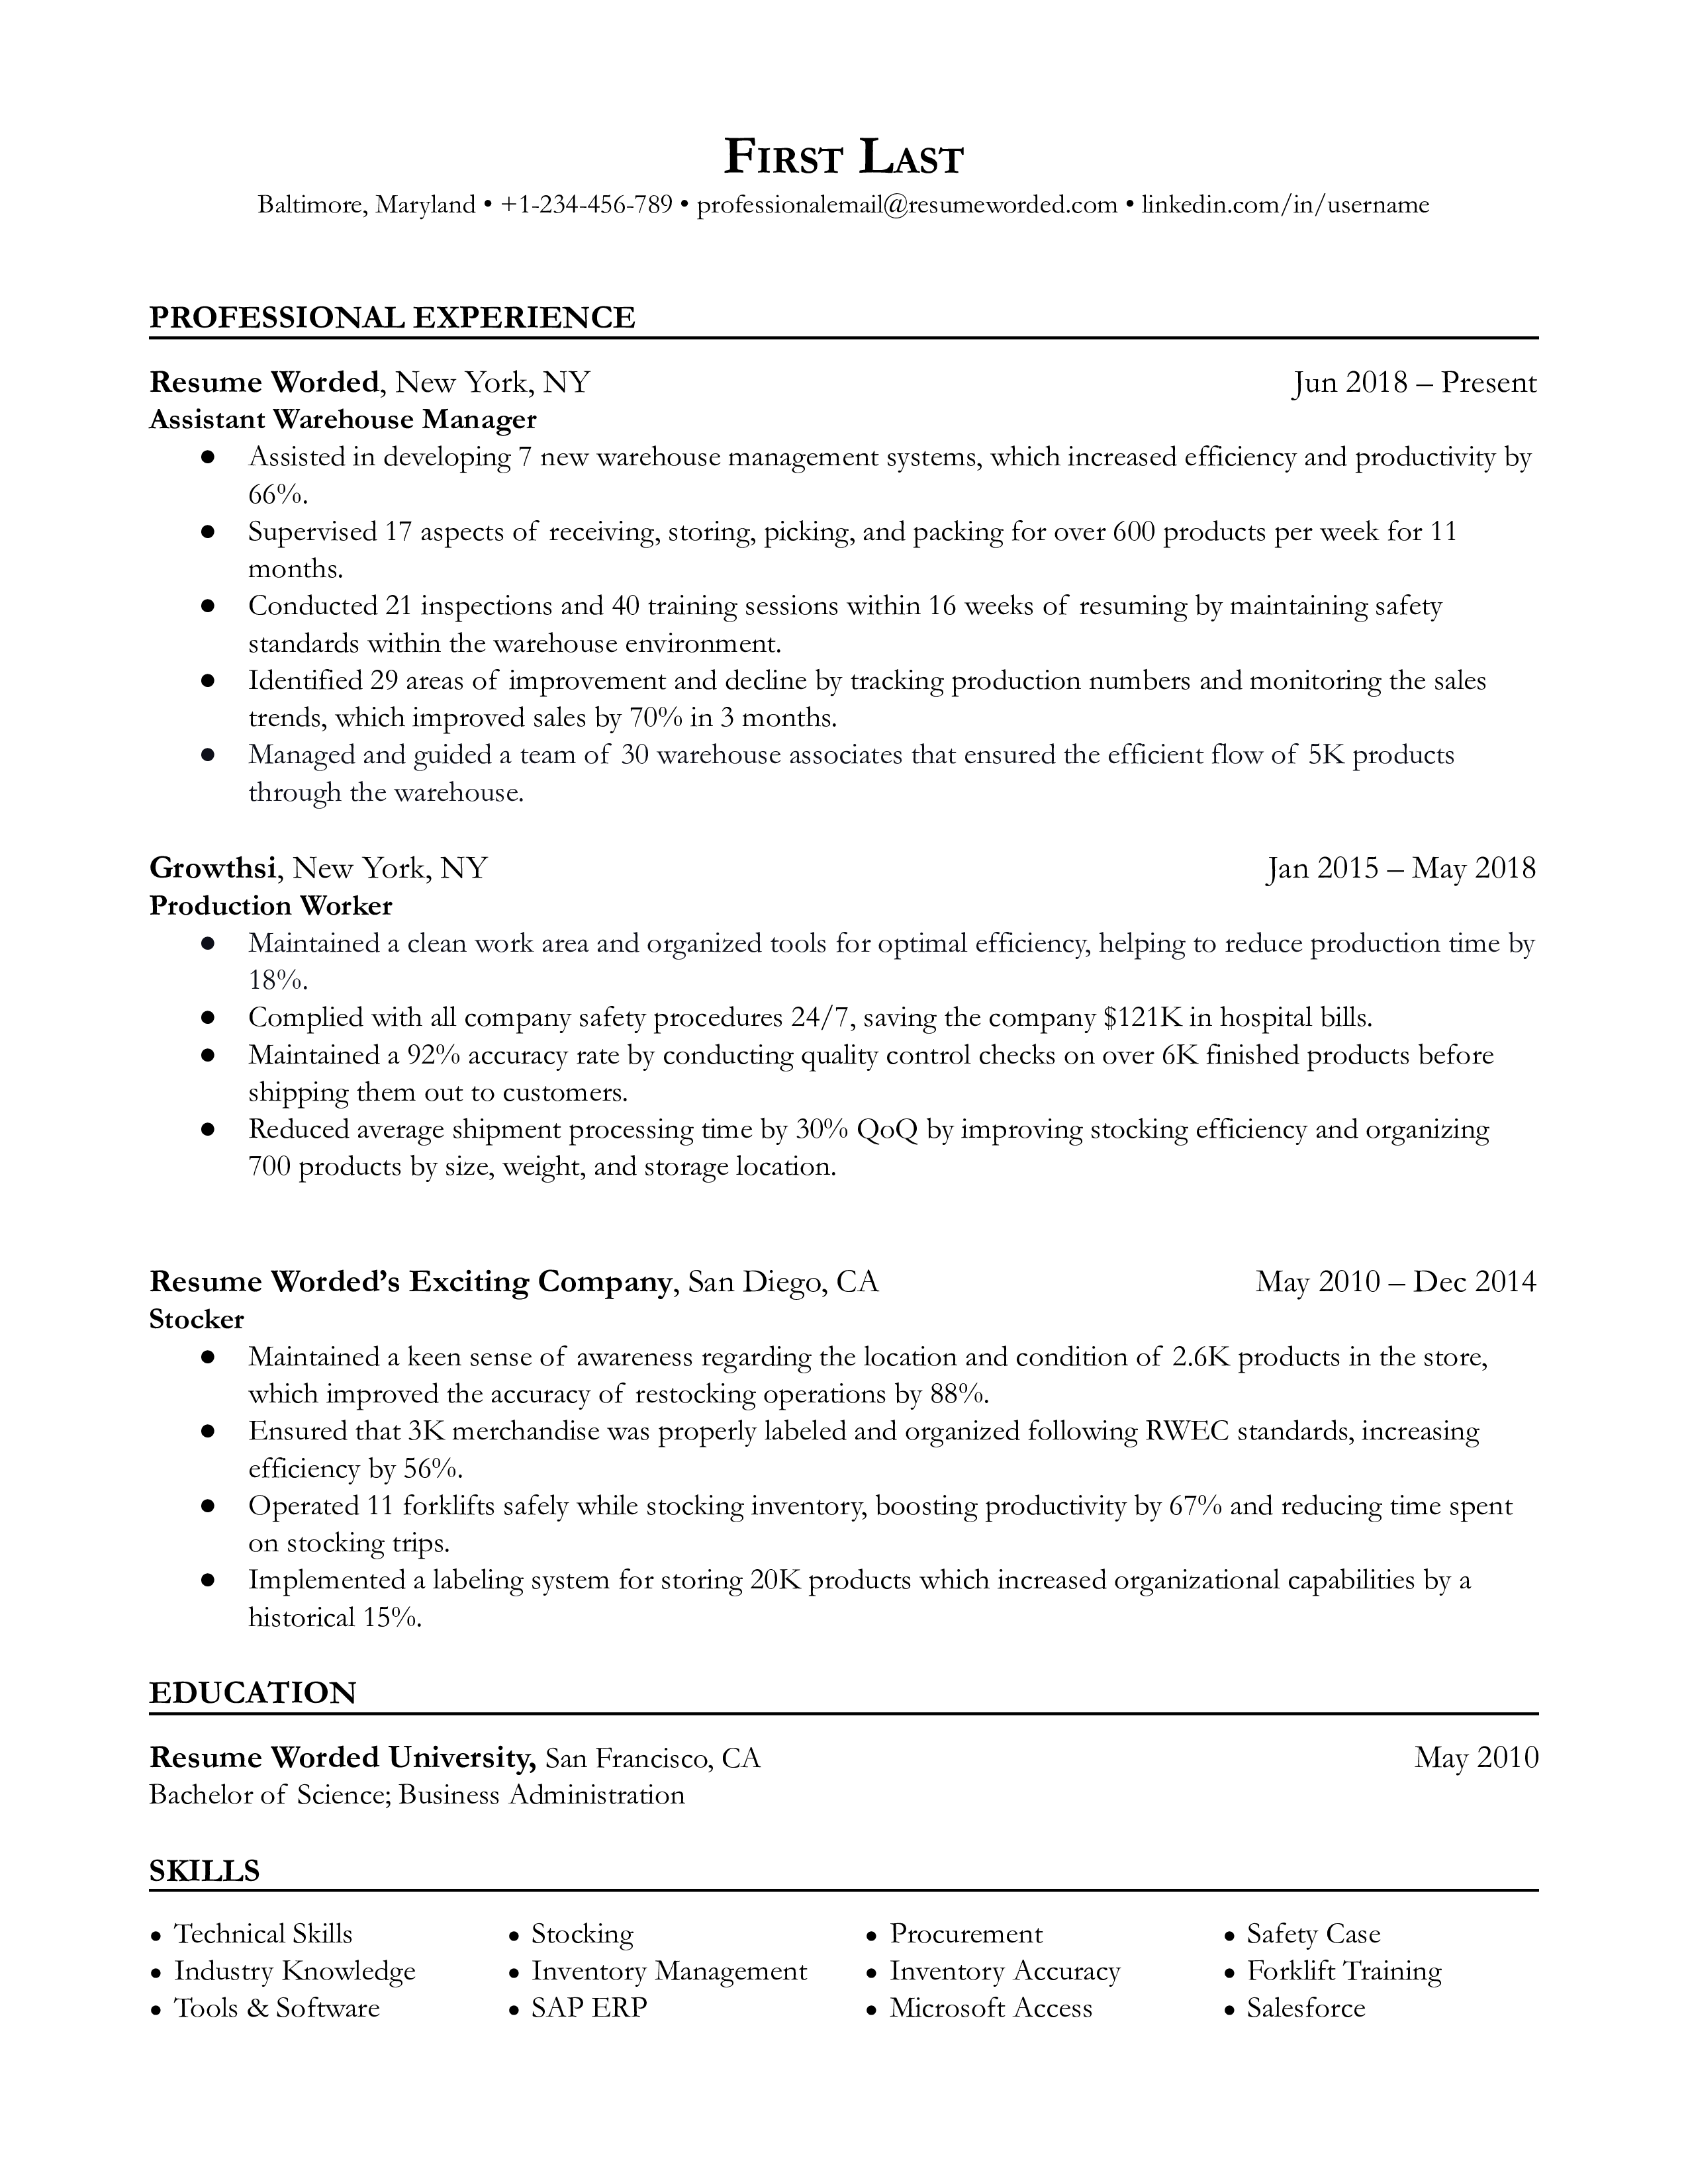 An assistant warehouse manager resume template that includes contact information, relevant work experience, and skills